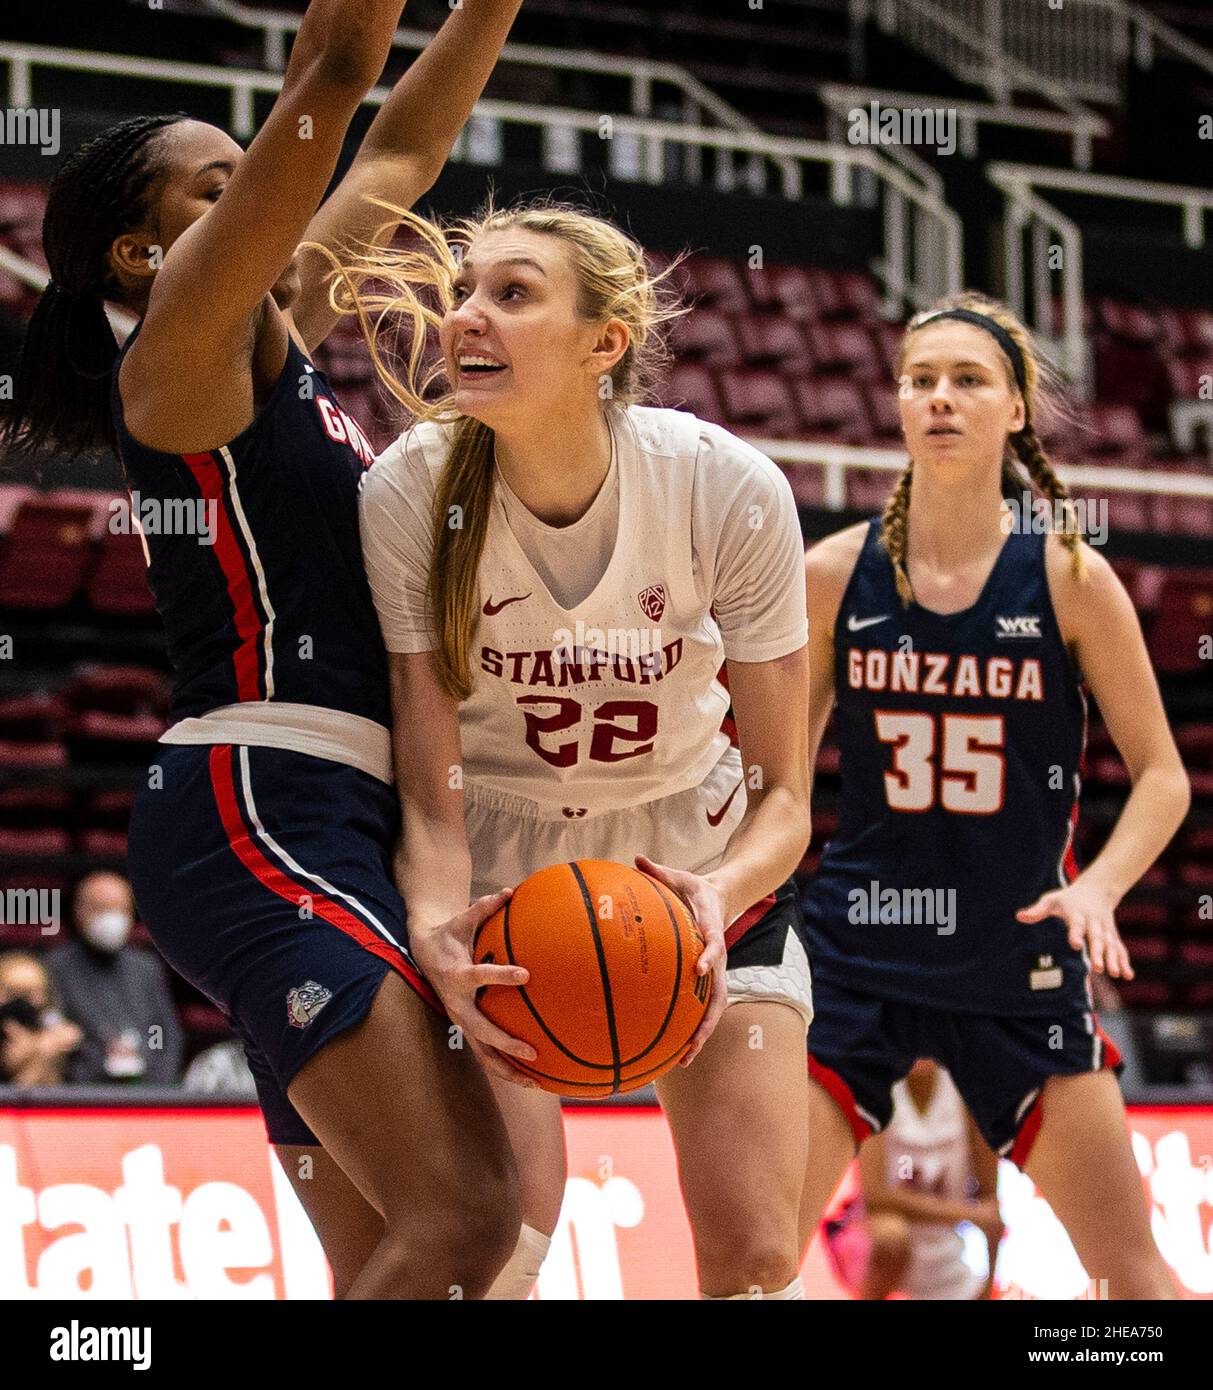 Stanford, CA, USA. 09th Jan, 2022. A. Stanford forward Cameron Brink (22)  goes to the basket during the NCAA Women's Basketball game between Gonzaga  Bulldogs and the Stanford Cardinal. Stanford won 66-50